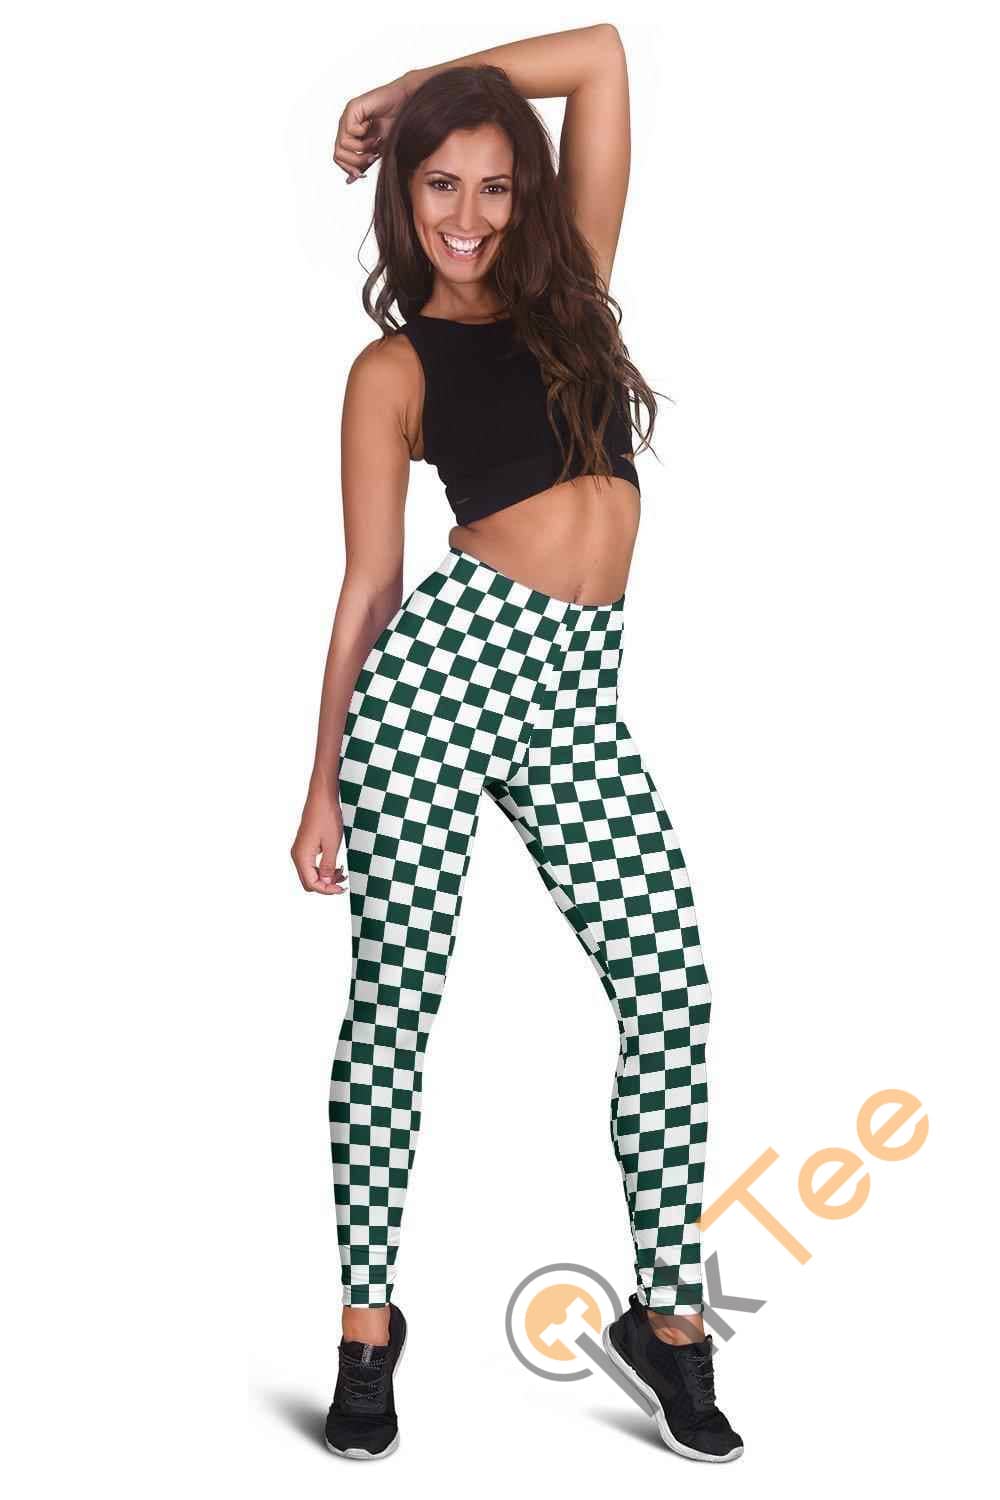 Inktee Store - Michigan State Spartans Fan Inspired 3D All Over Print For Yoga Fitness Checkers Women'S Leggings Image